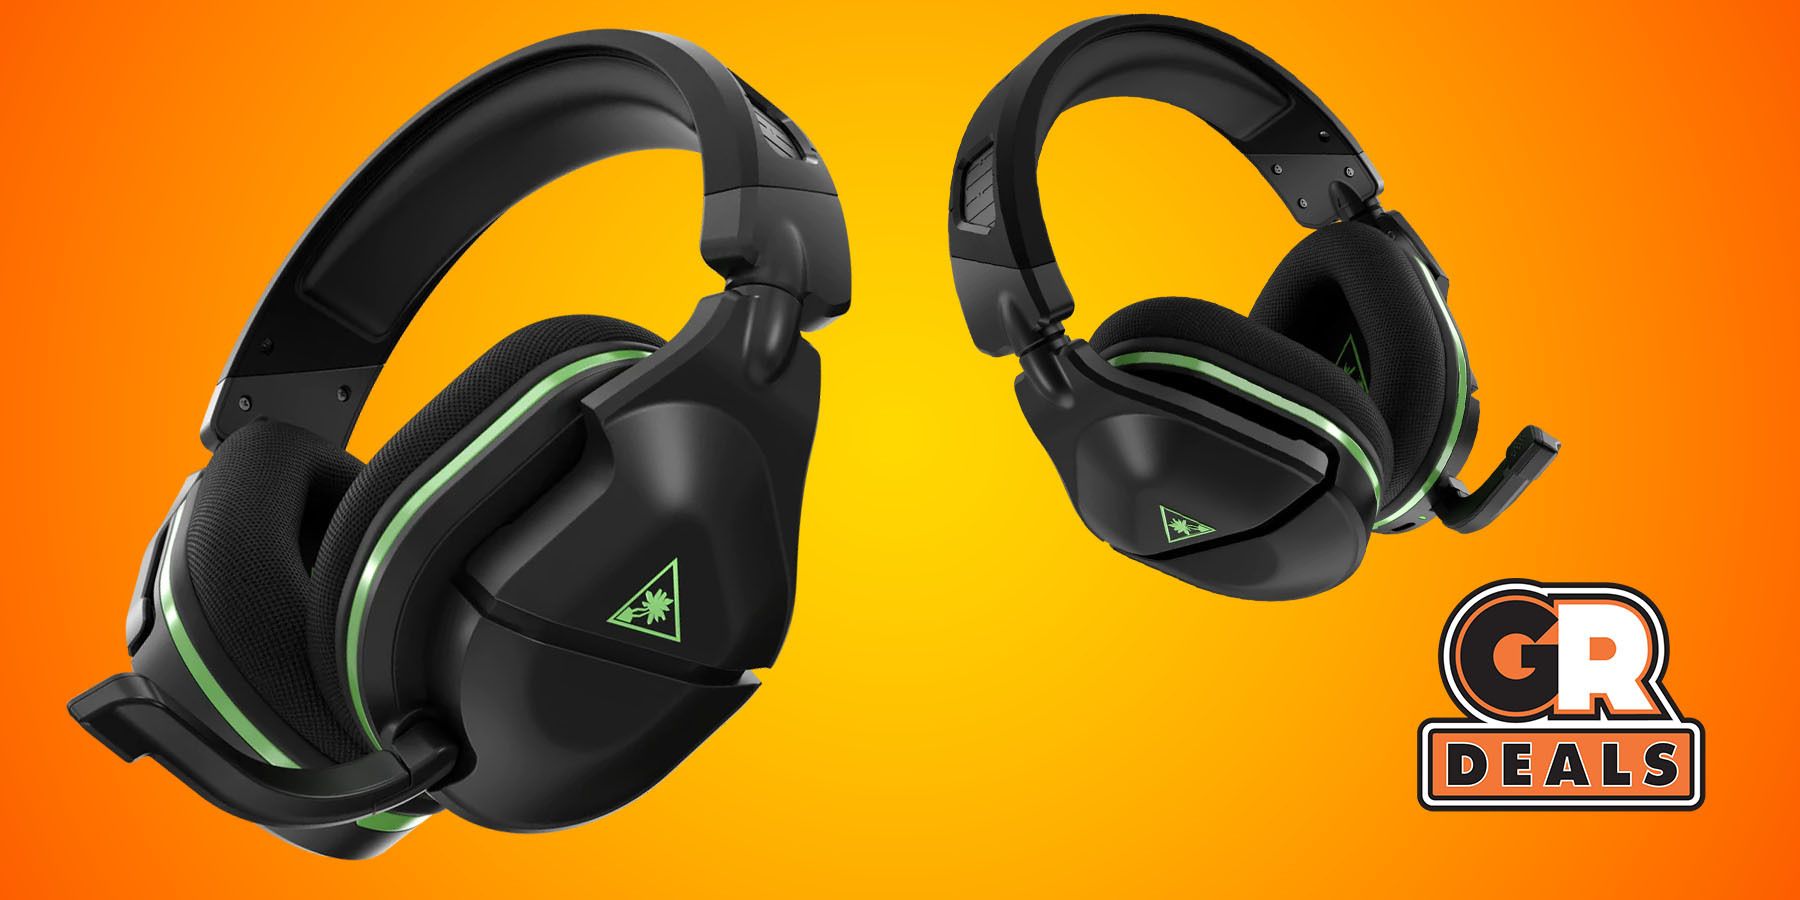 Act Fast and Get the Turtle Beach Stealth 600 Gen 2 Gaming Headset for .95